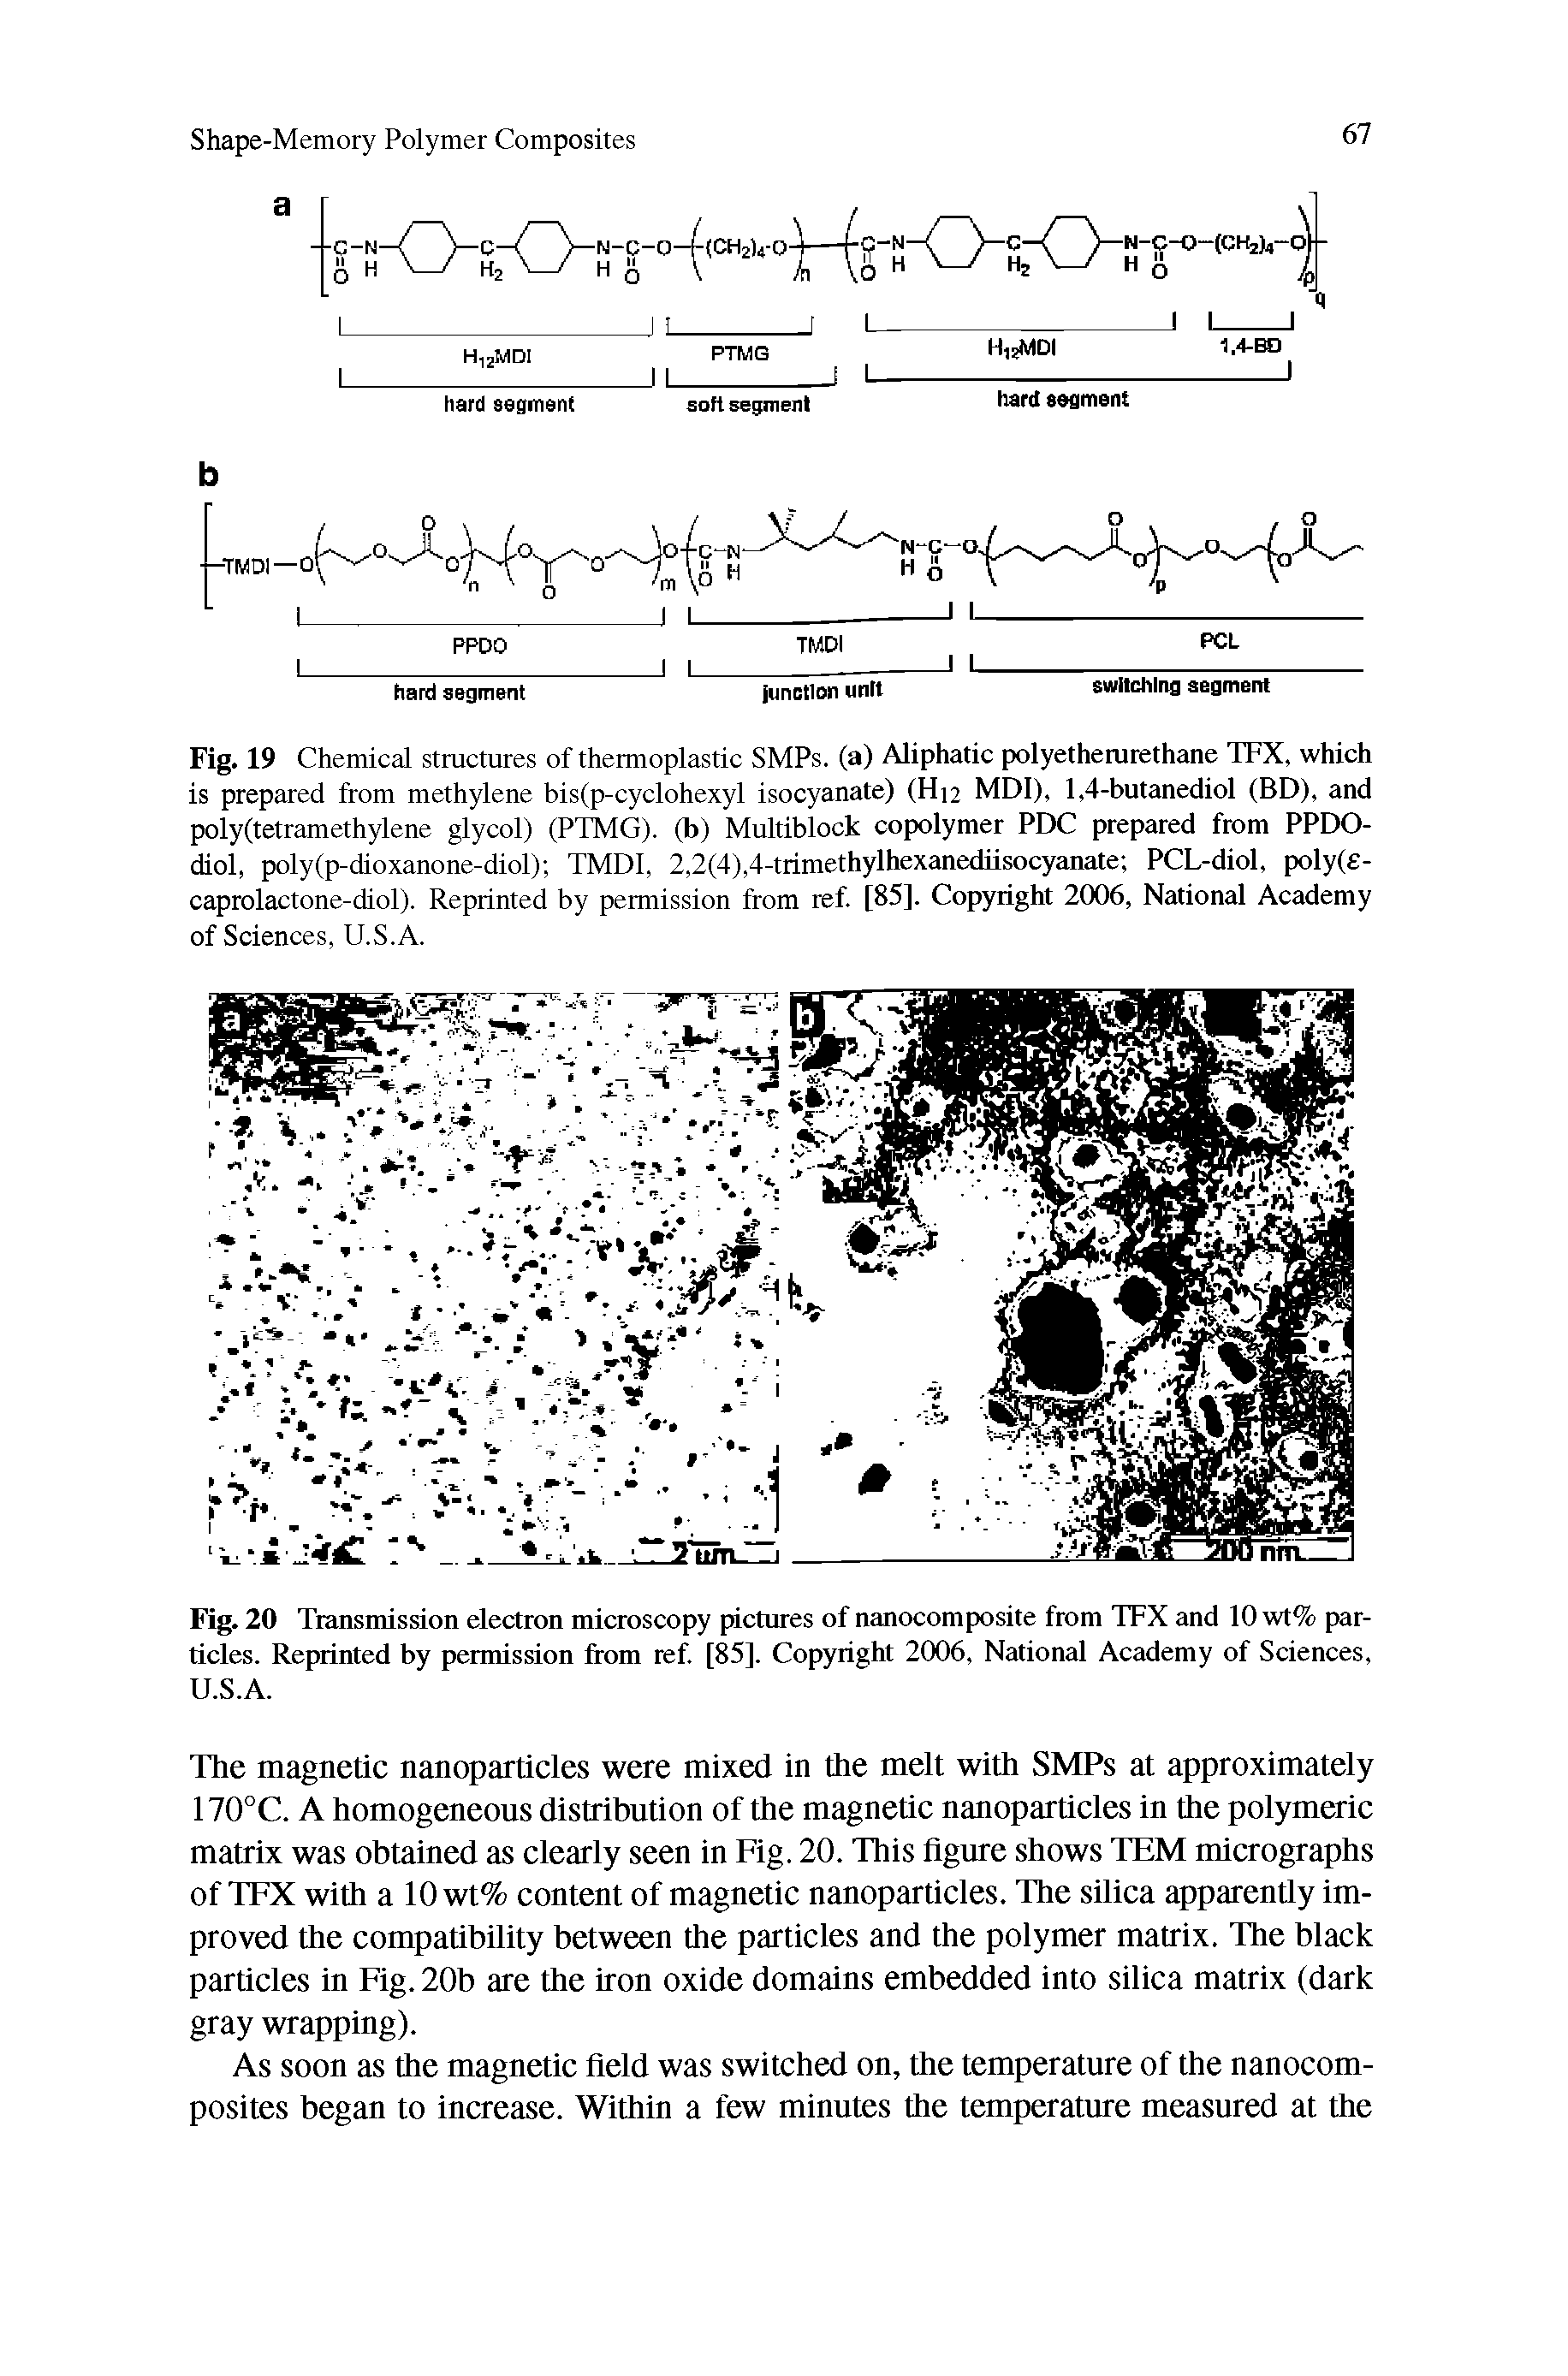 Fig. 20 Transmission electron microscopy pictures of nanocomposite from TFX and 10 wt% particles. Reprinted by permission from ref. [85]. Copyright 2006, National Academy of Sciences, U.S.A.